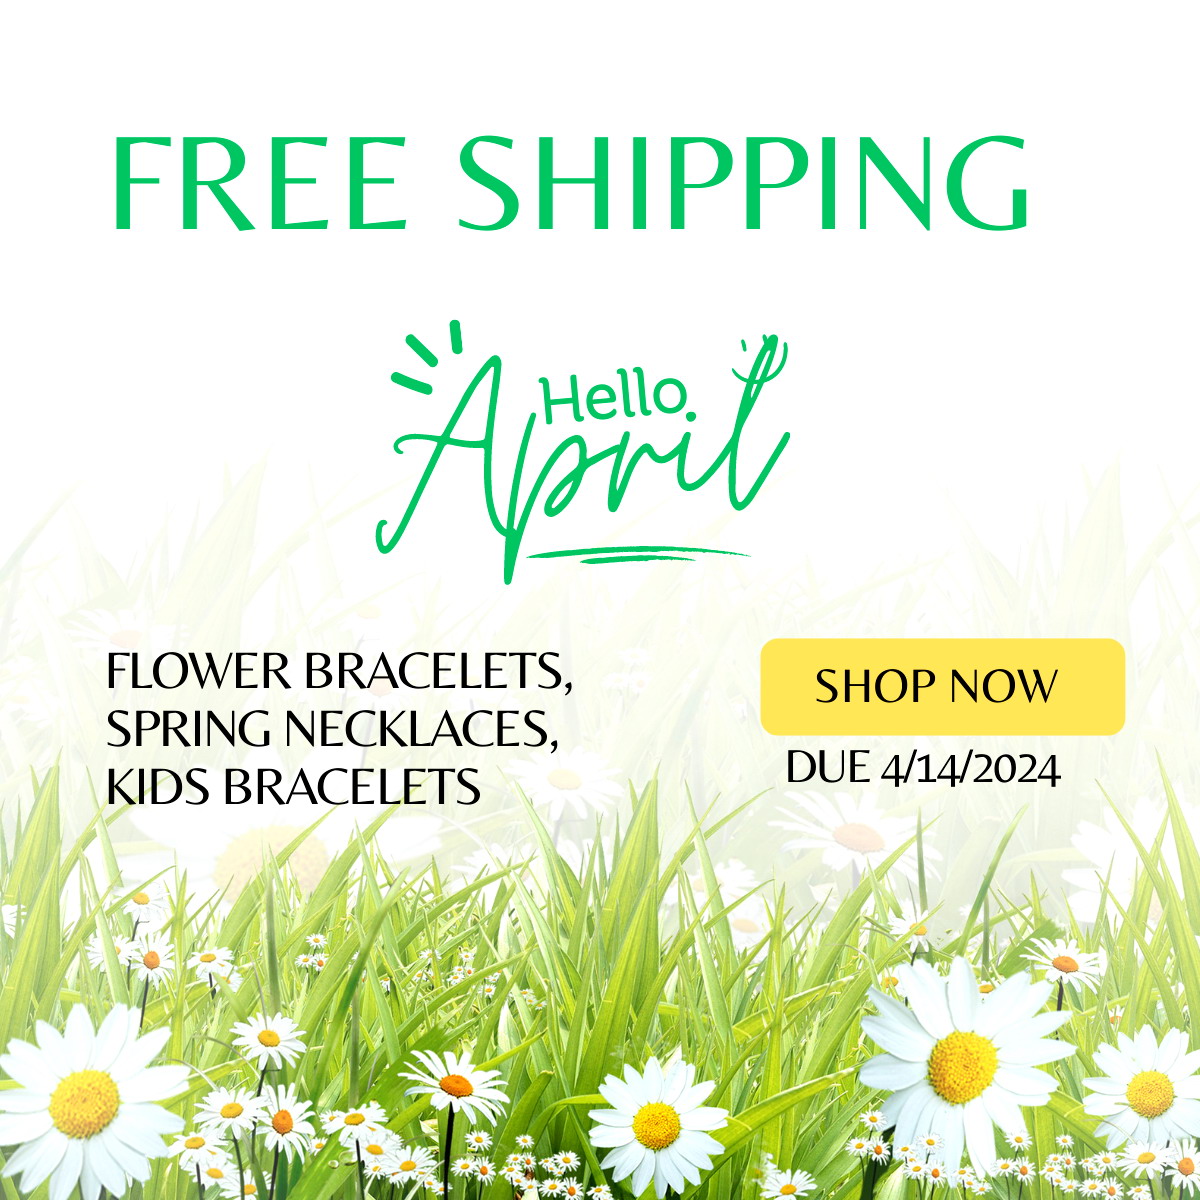 Fionaaccessories.com Free Shipping Flower, Kids, Spring Necklaces by 4/14/2024.